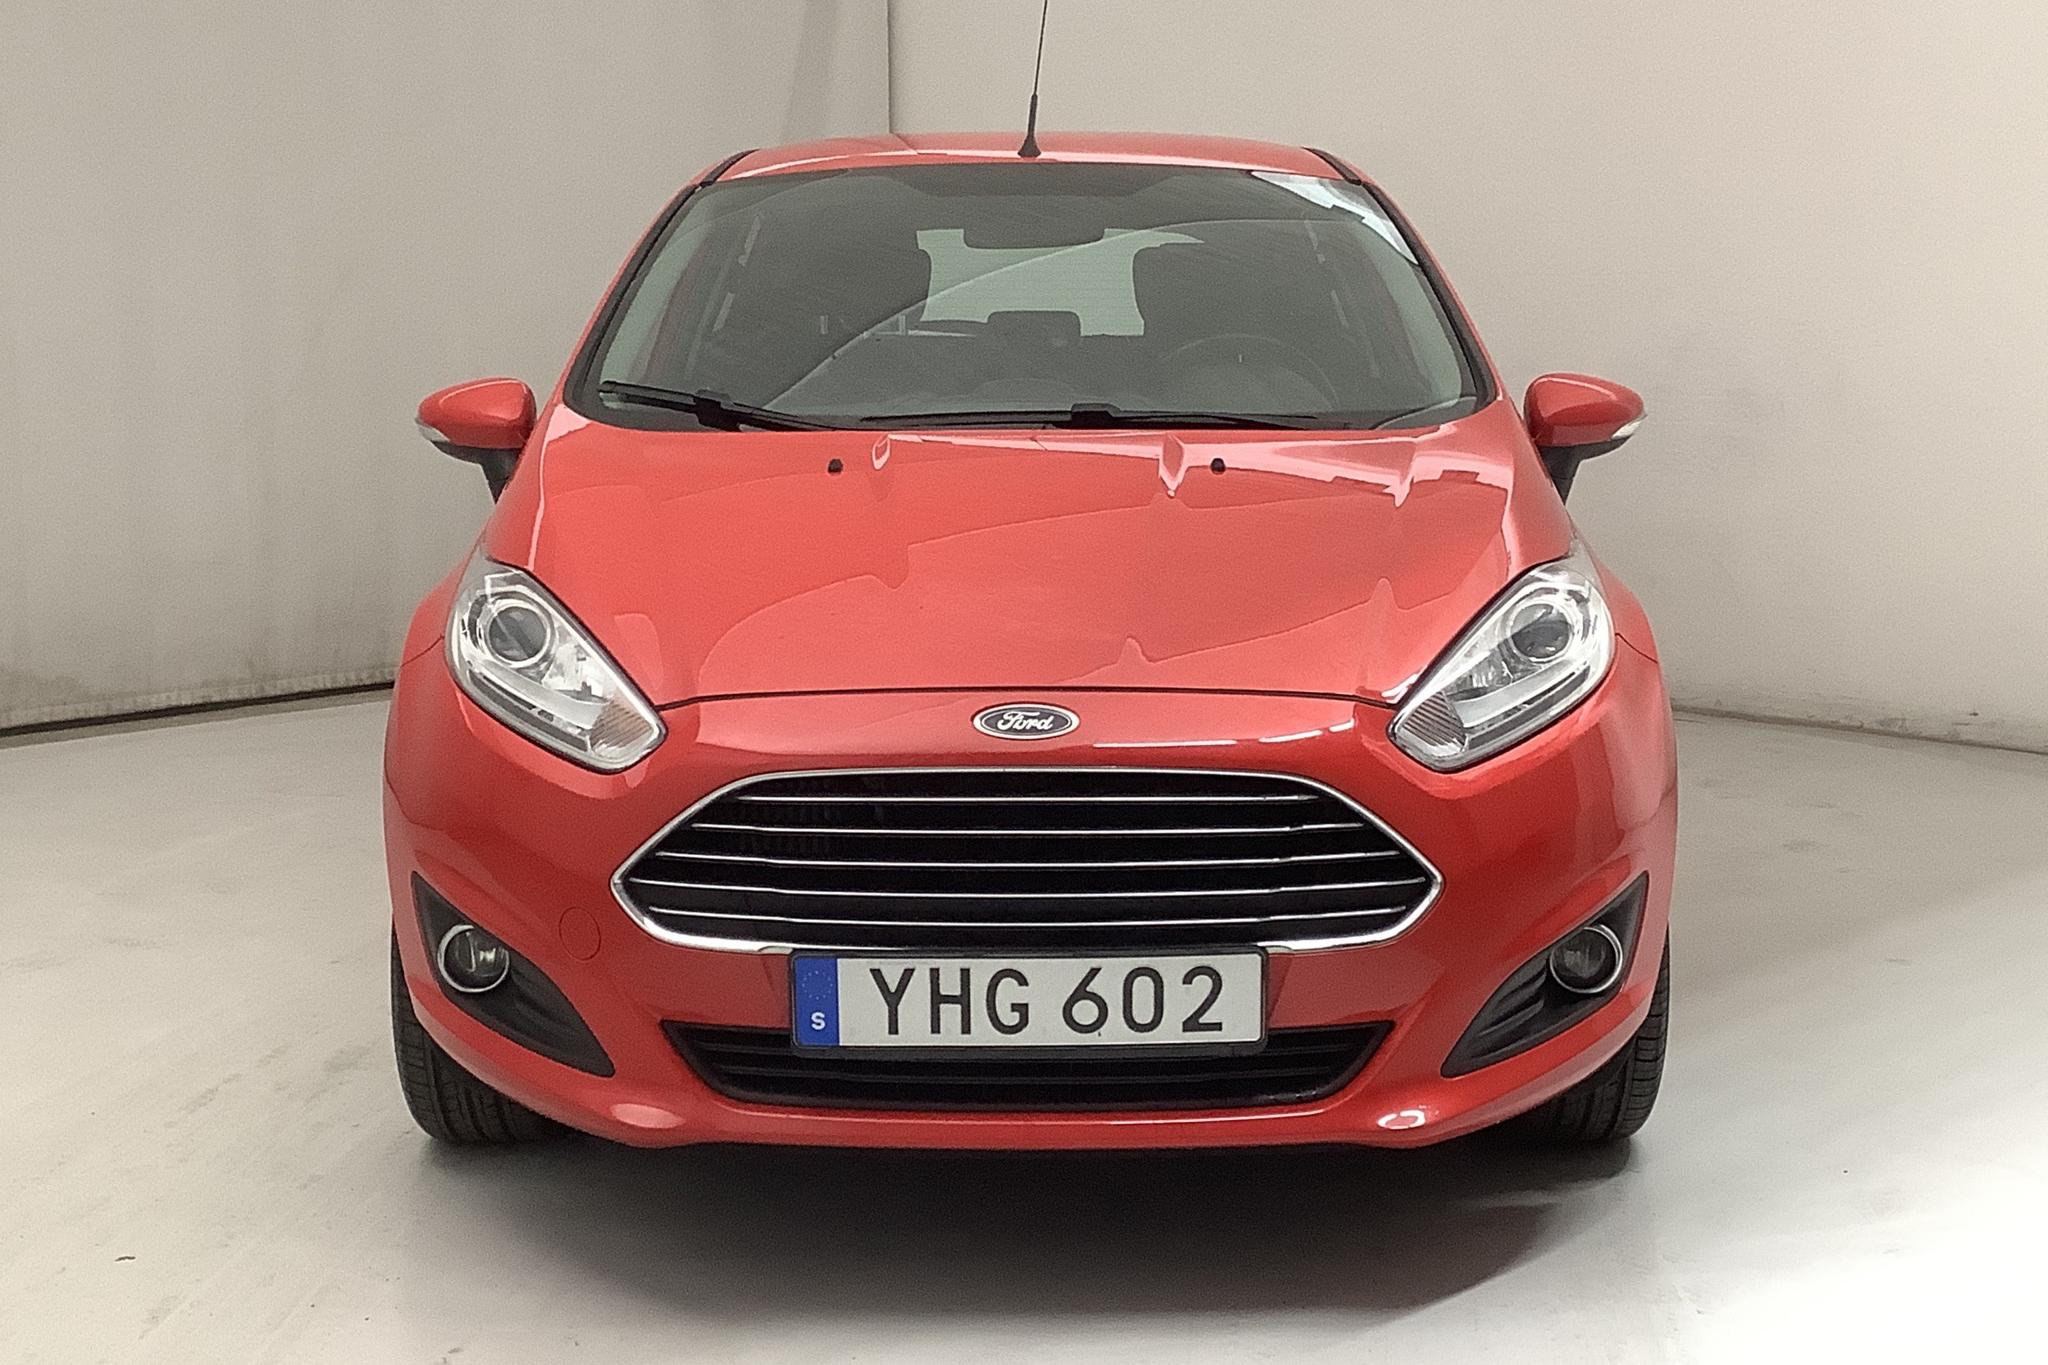 Ford Fiesta 1.0T EcoBoost 5dr (100hk) - 104 590 km - Manual - red - 2017